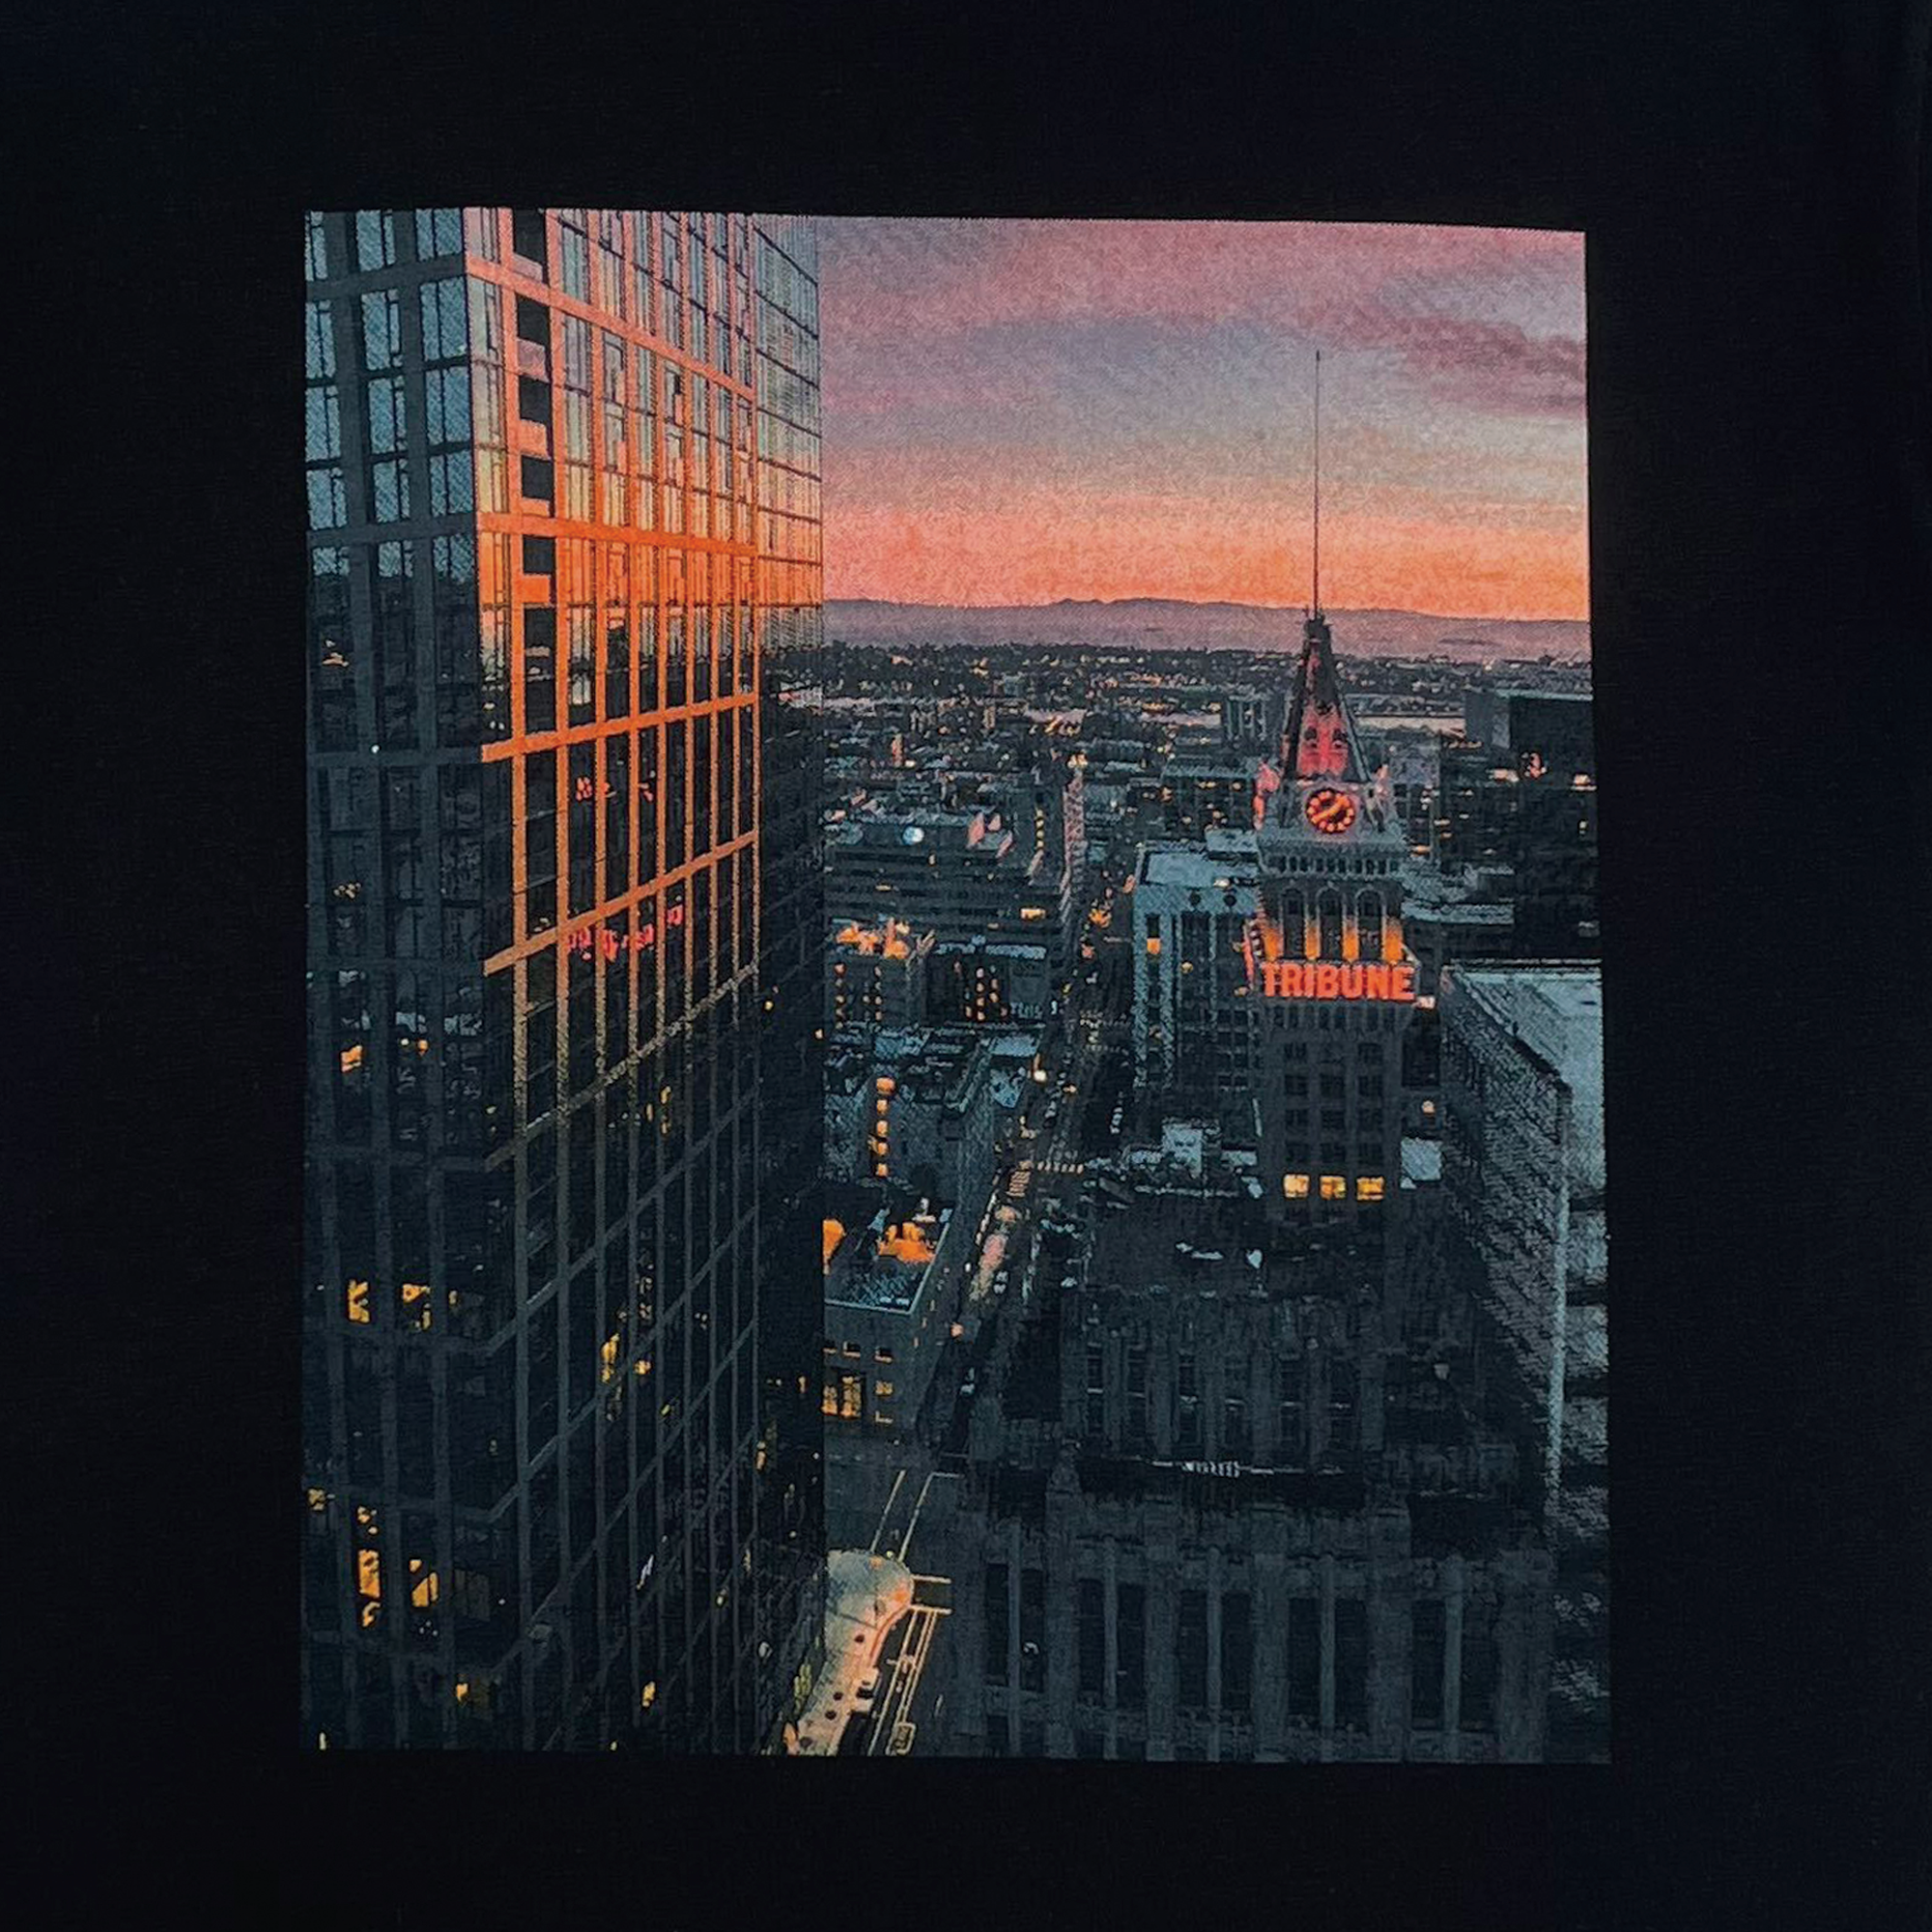 Close-up of Vincent James' photography image of the Oakland Tribune building and the Downtown Oakland landscape on a black t-shirt.